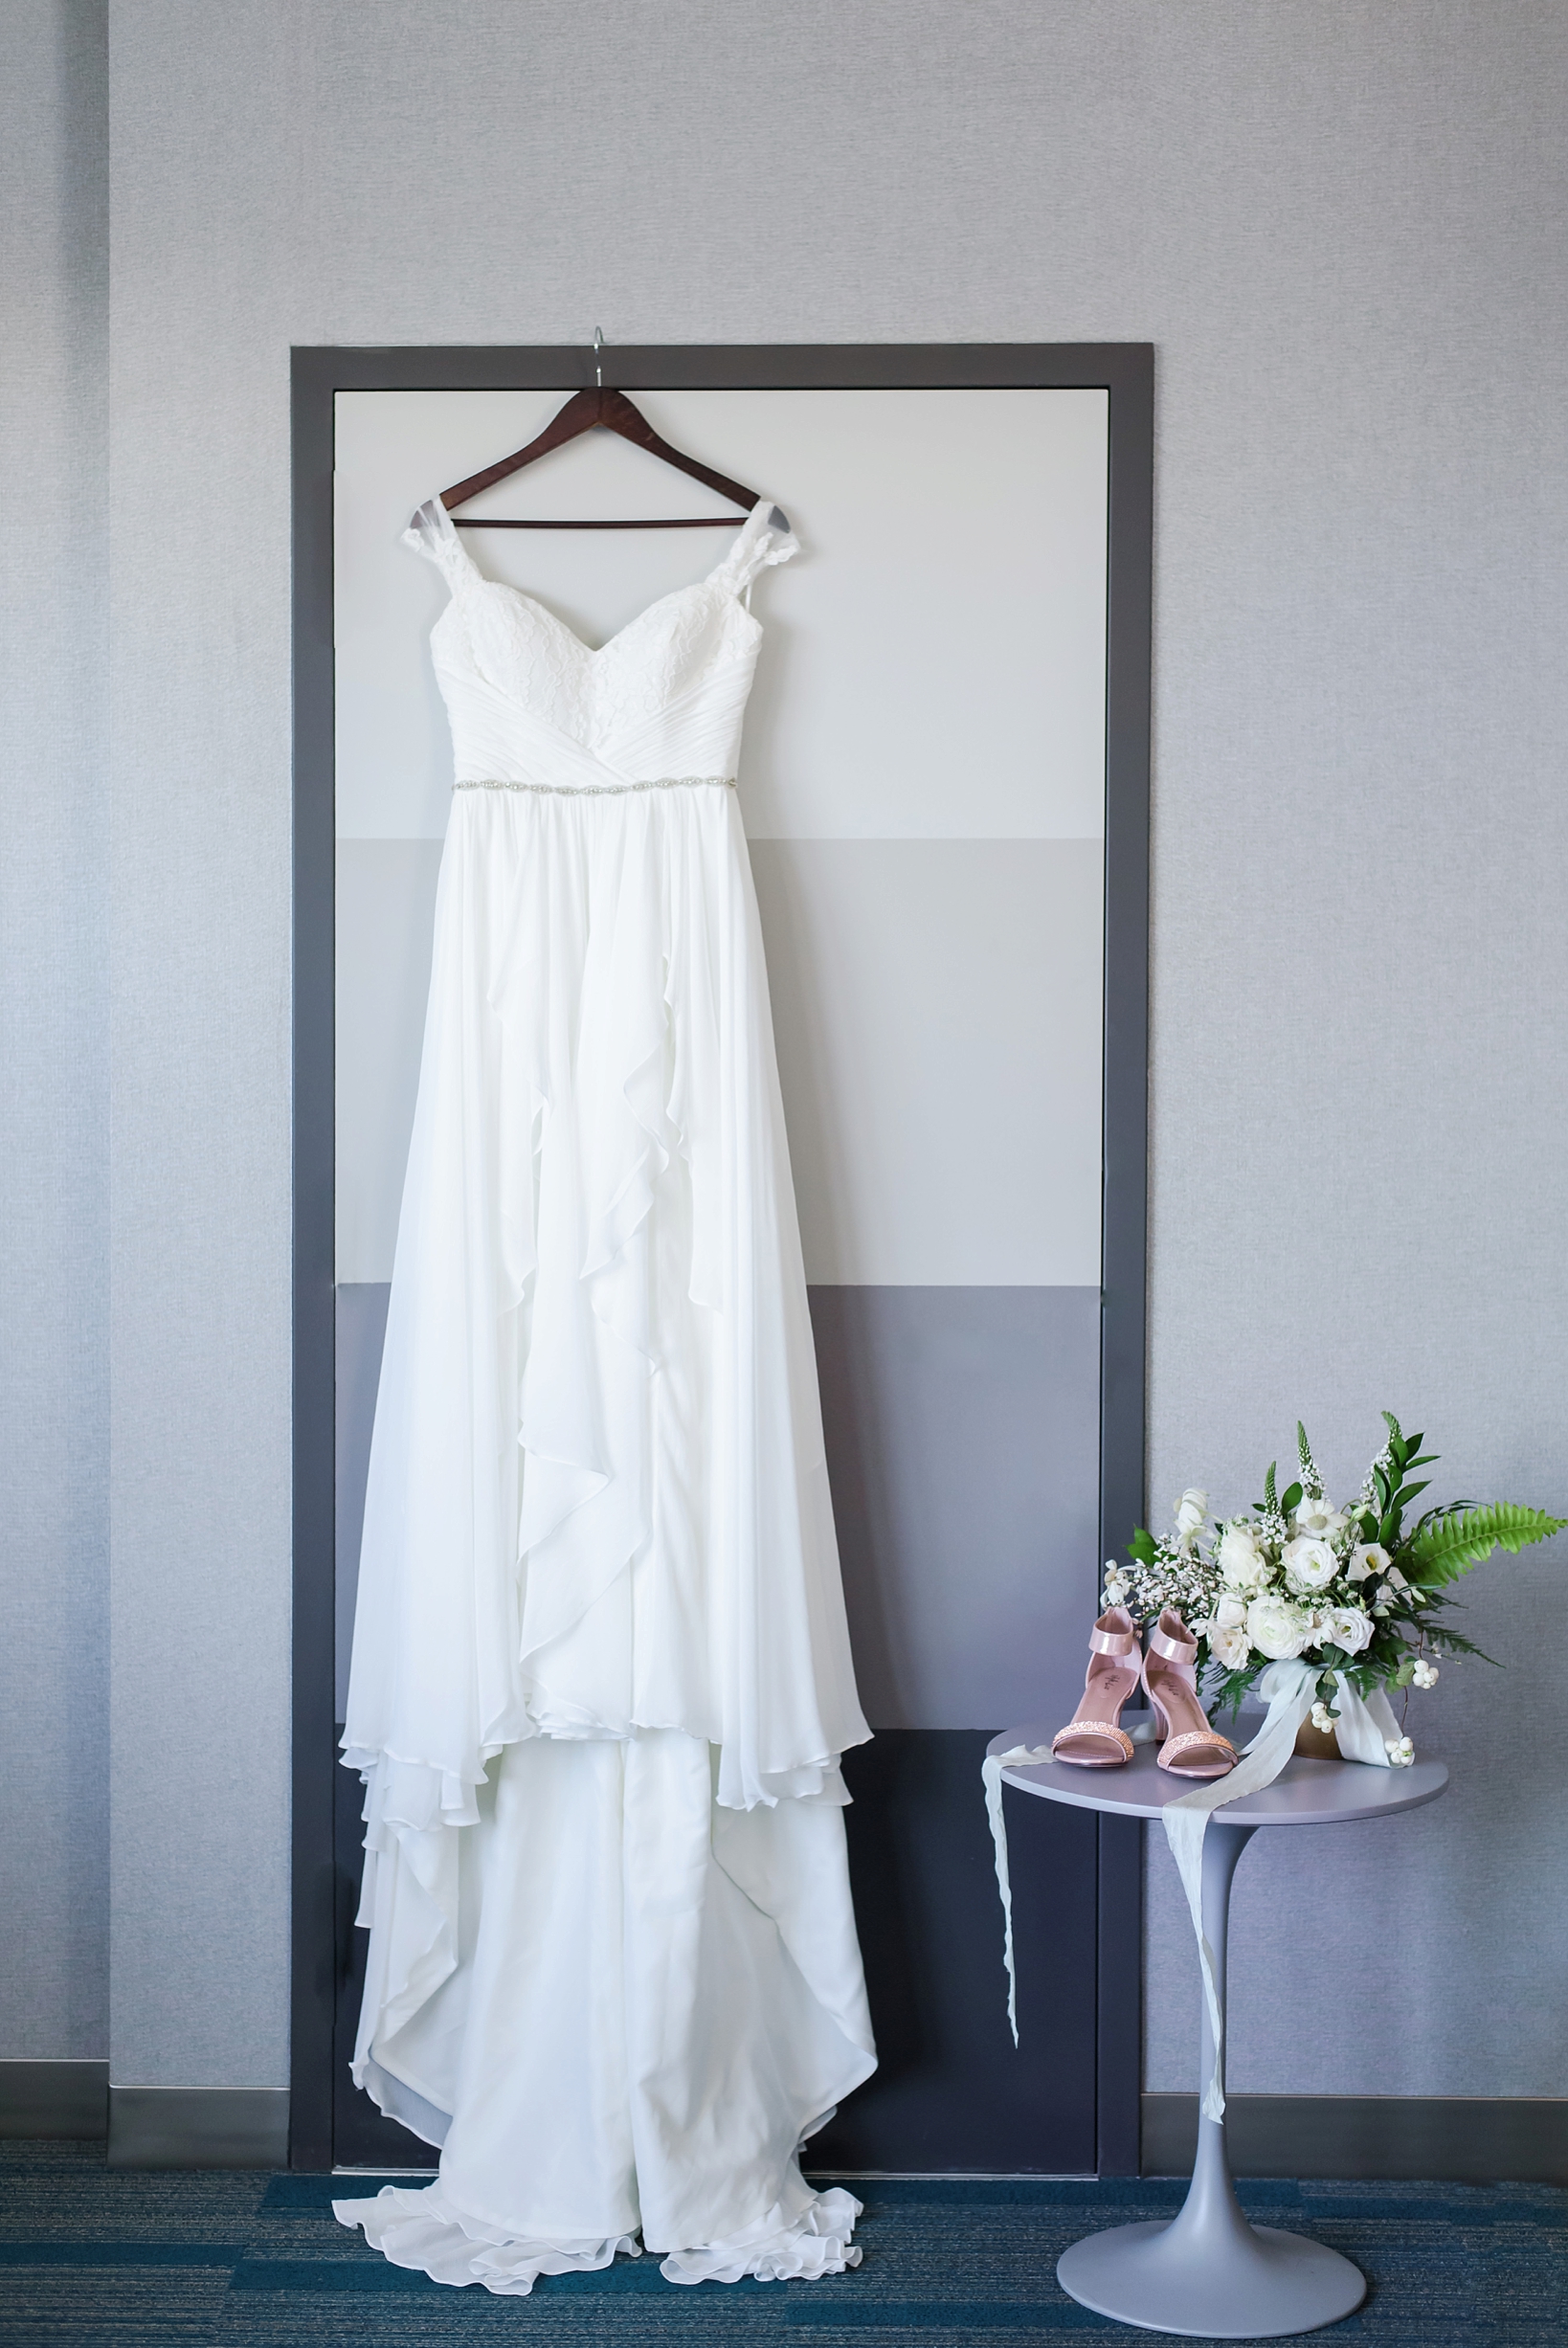 The wedding dress and the shoes with bridal bouquet